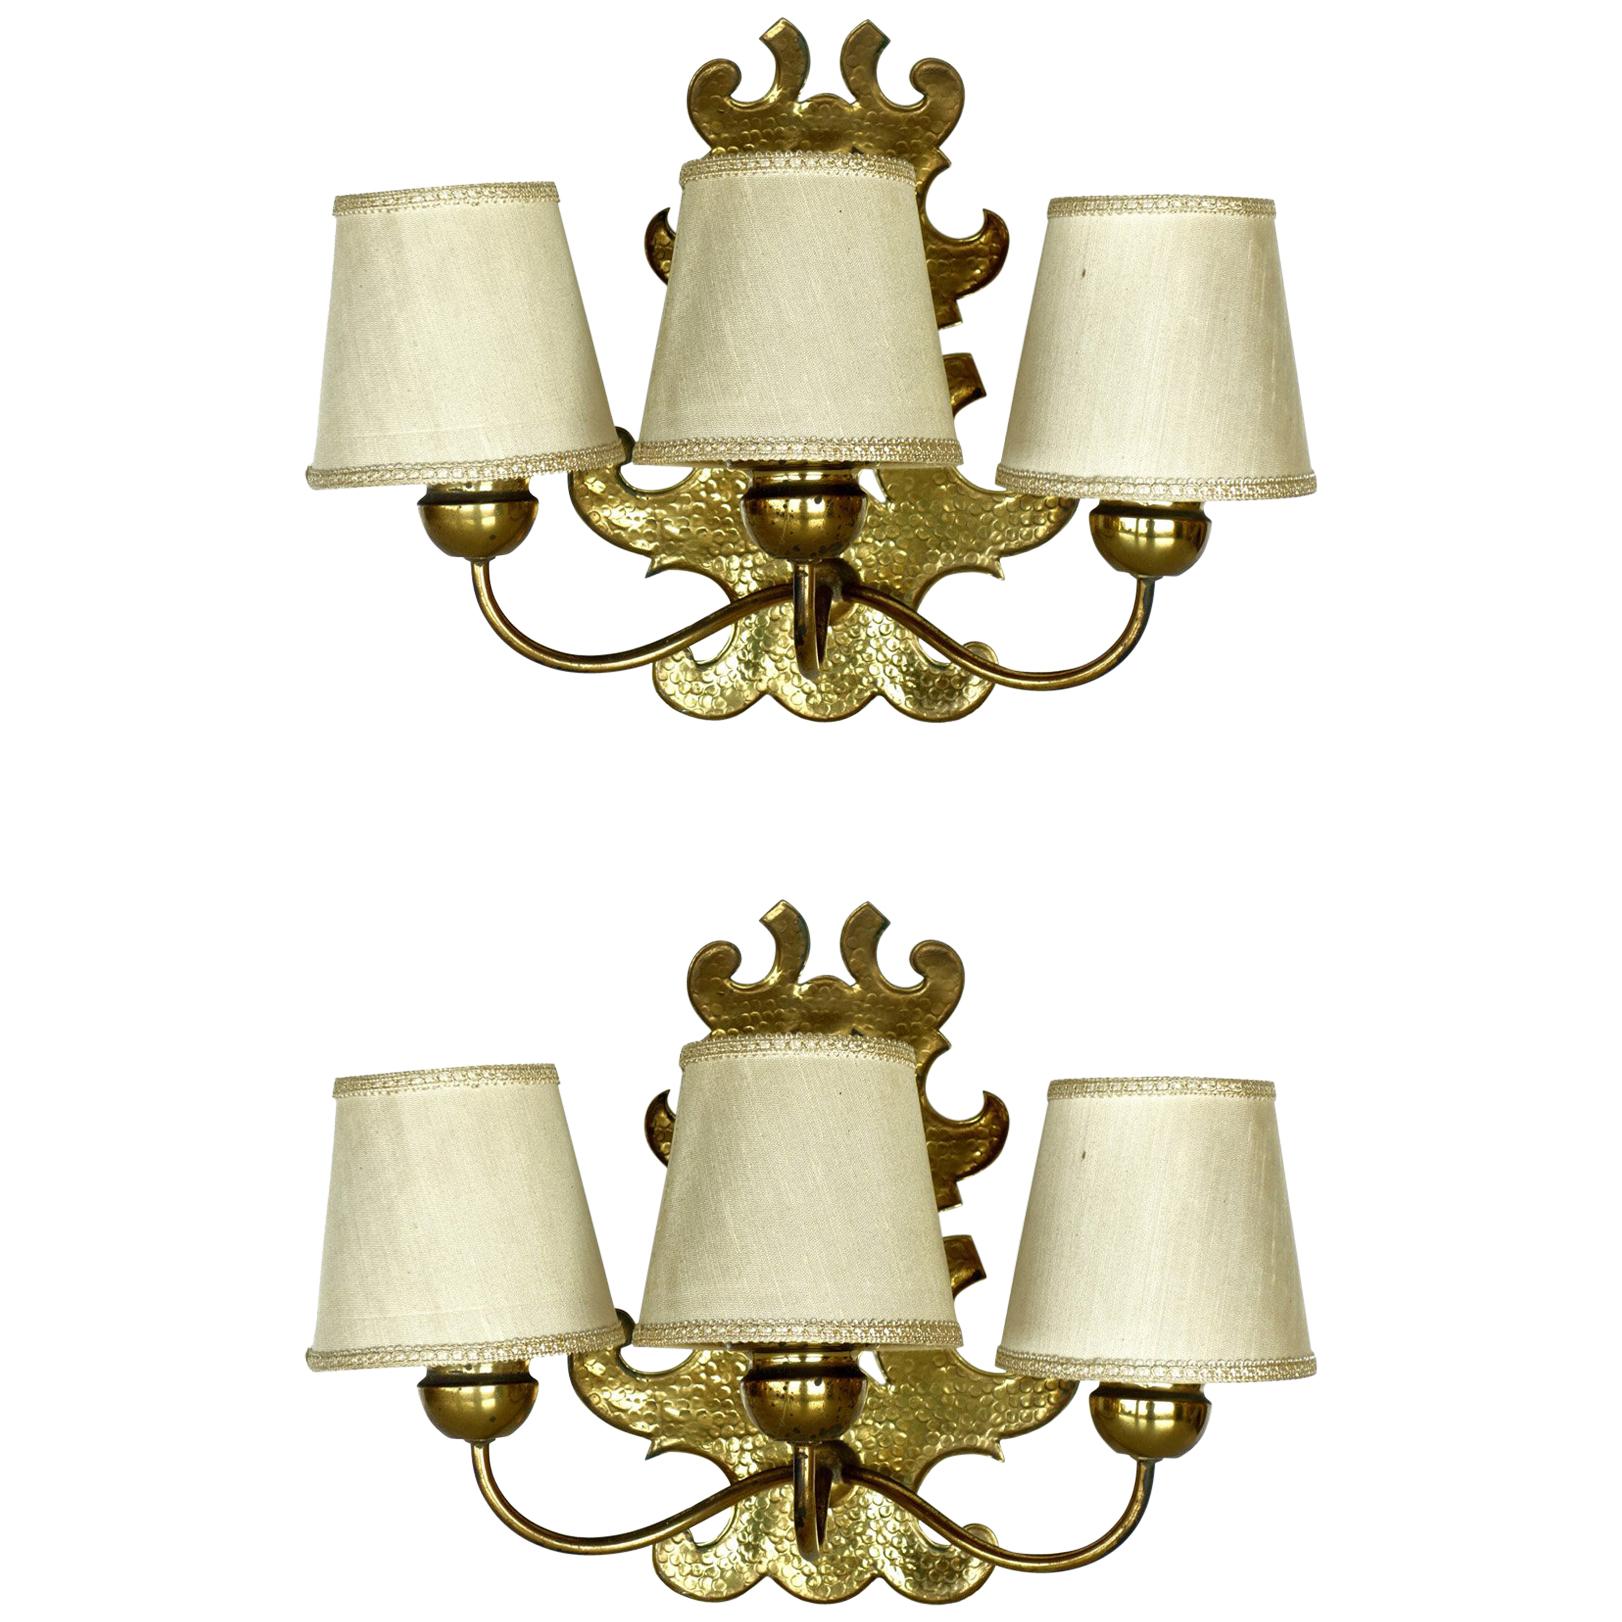 1950s by Gino Sarfatti for Arteluce Midcentury Italian Design Pair of Wall Lamps For Sale